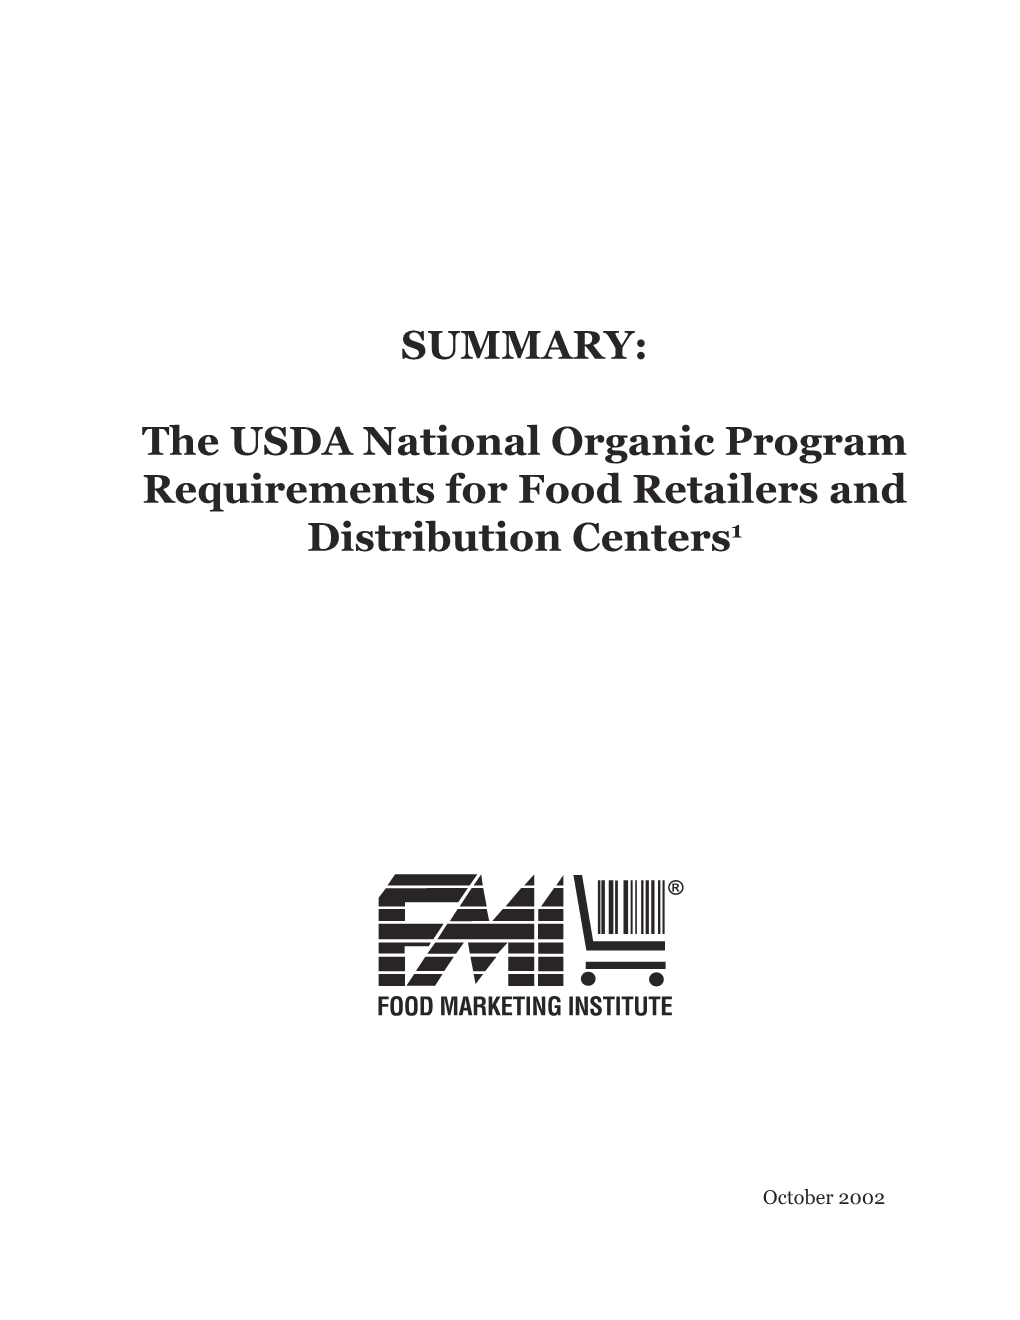 The USDA National Organic Program Requirements for Food Retailers and Distribution Centers1